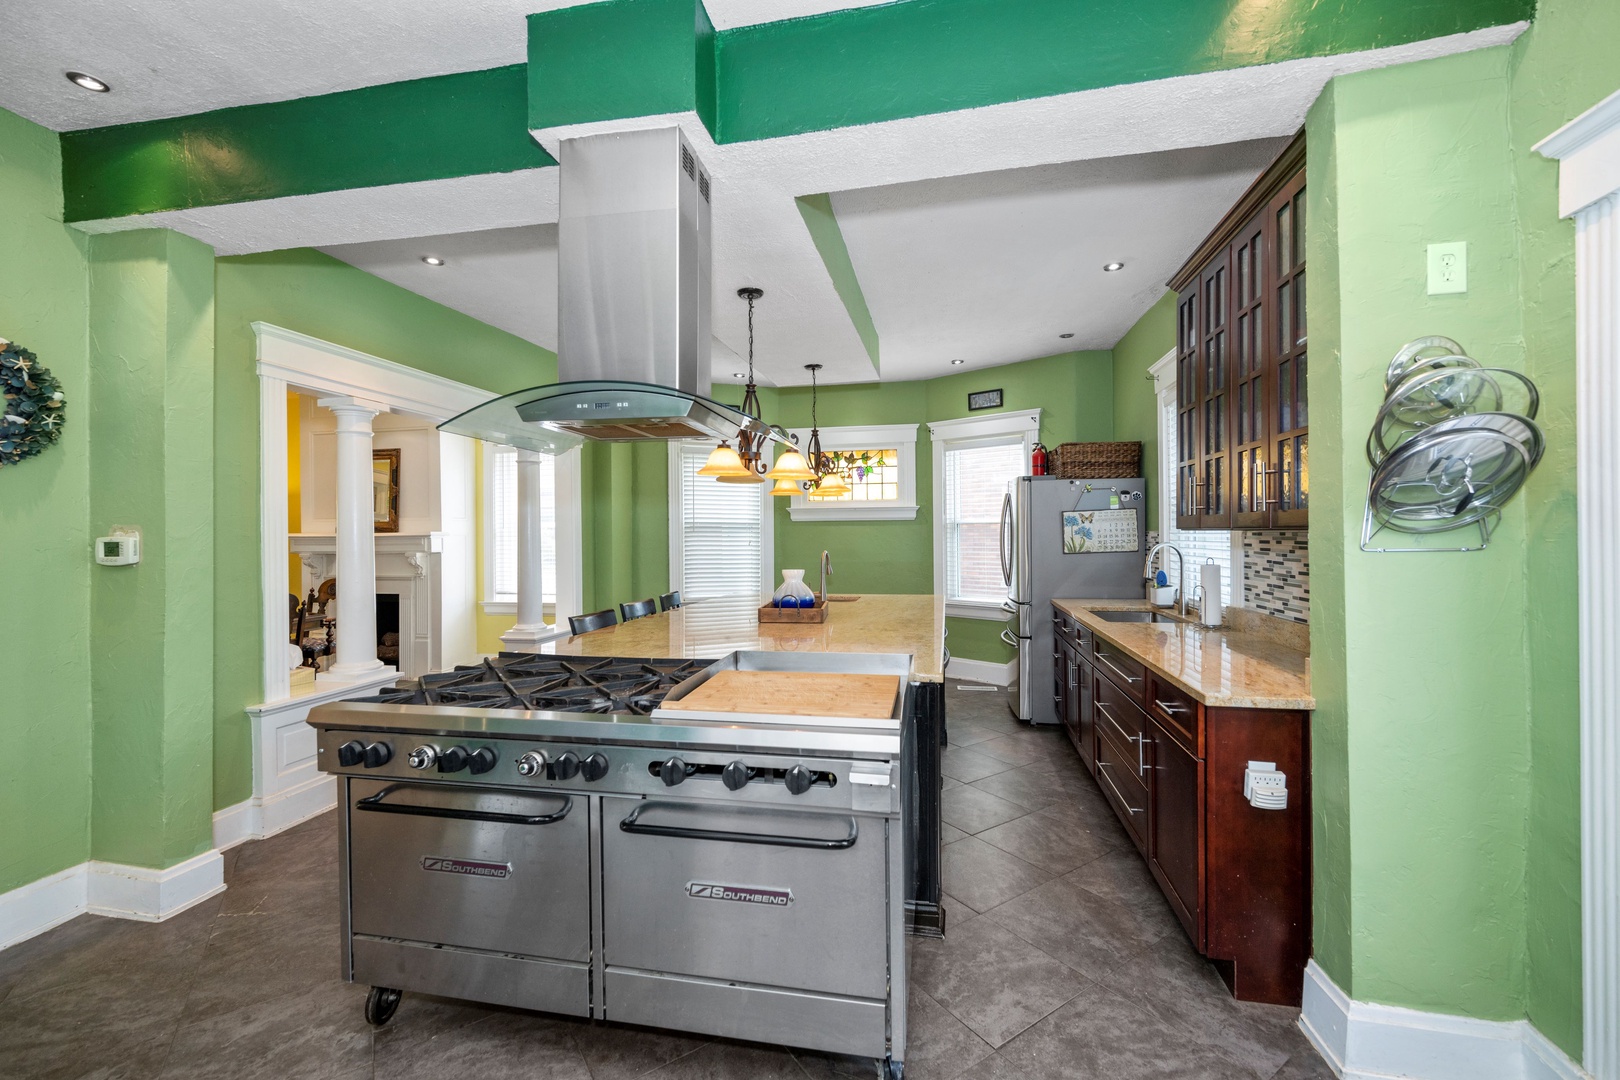 The kitchen is a chef’s dream, with loads of space & high-end amenities